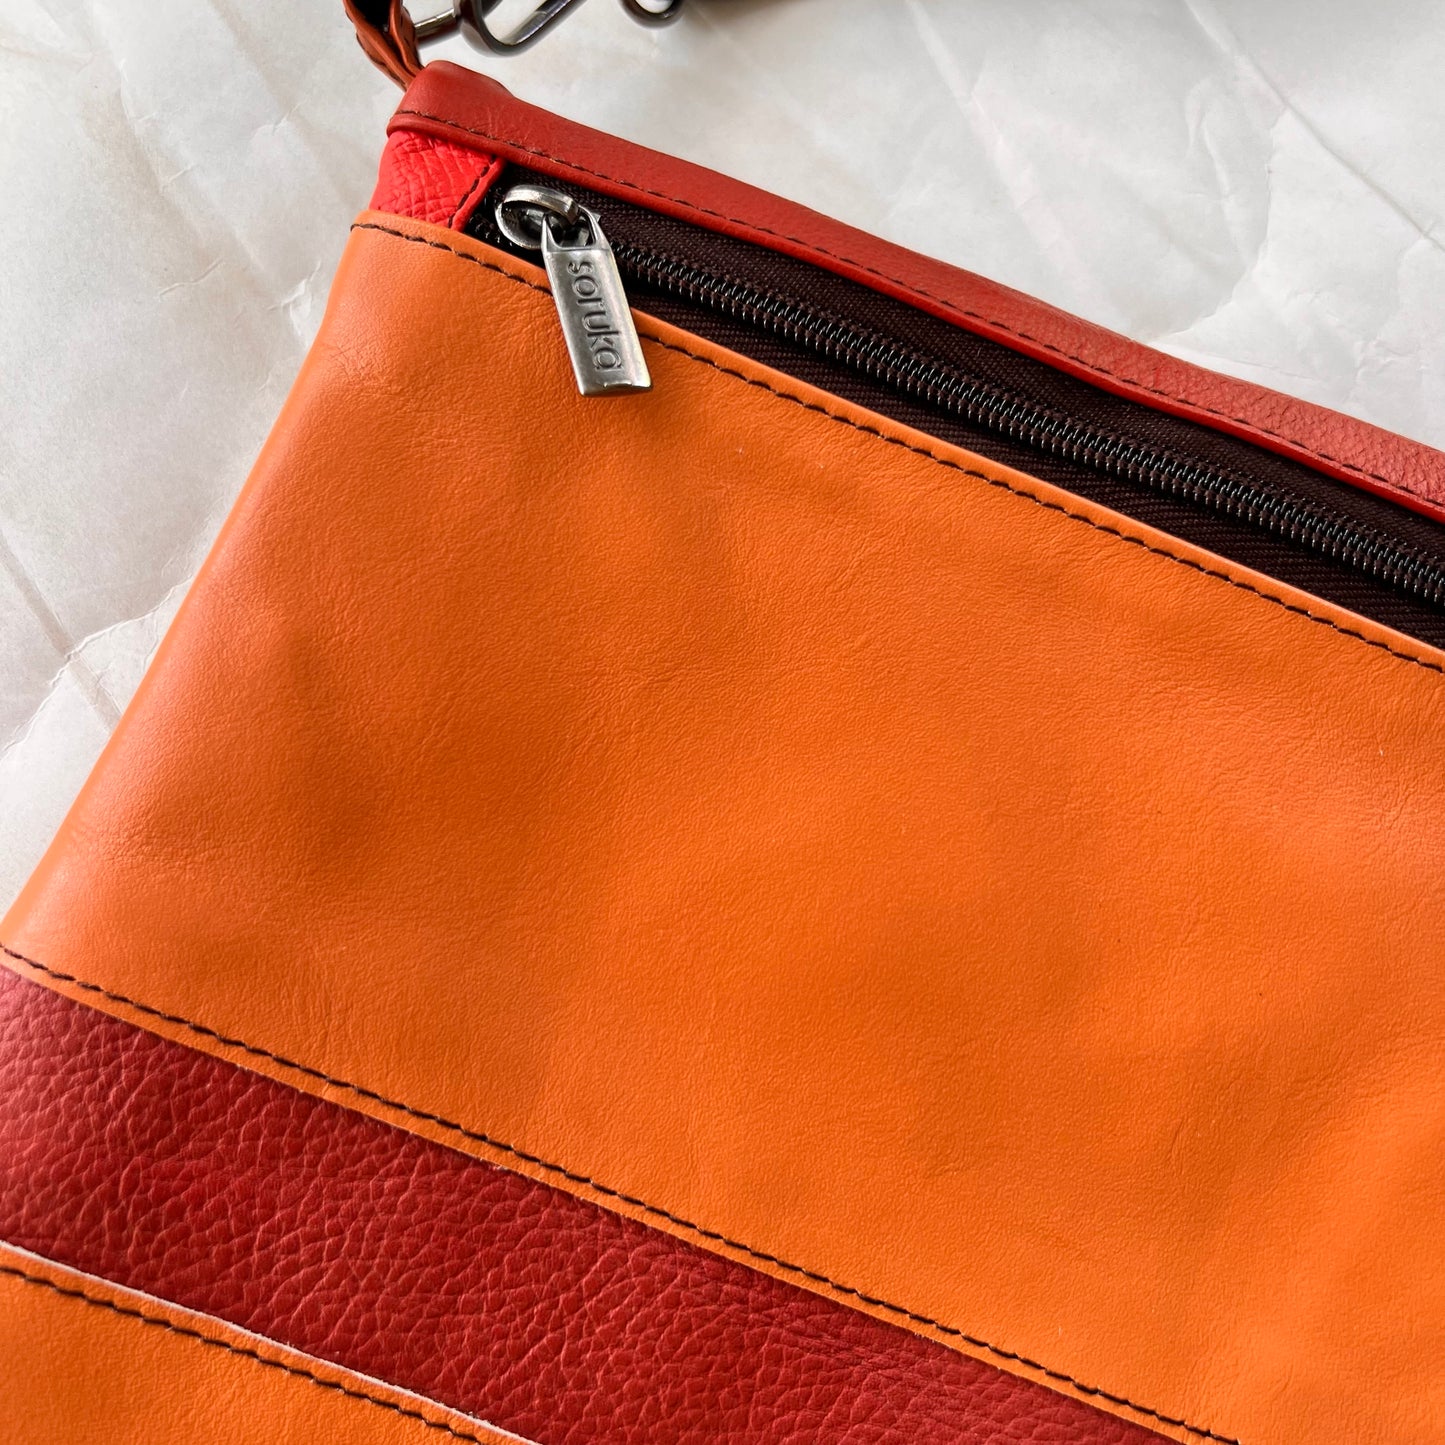 close-up of shades of orange striped greta bag with zipper across the top.